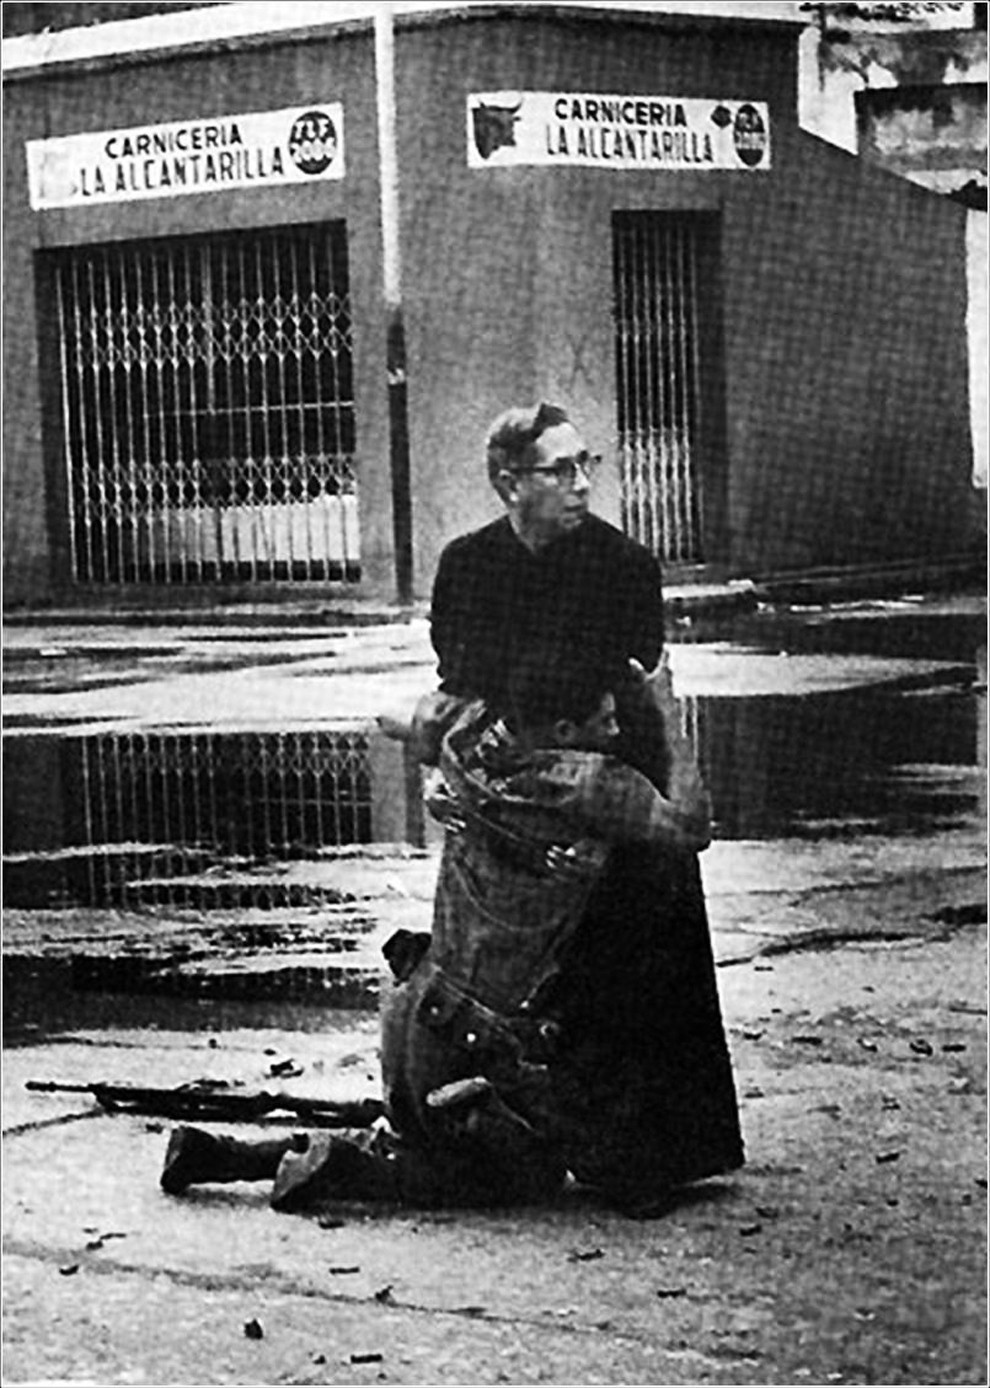 Navy chaplain Luis Padillo gives last rites to a soldier wounded by sniper fire during a revolt in Venezuela. (Héctor Rondón Lovera